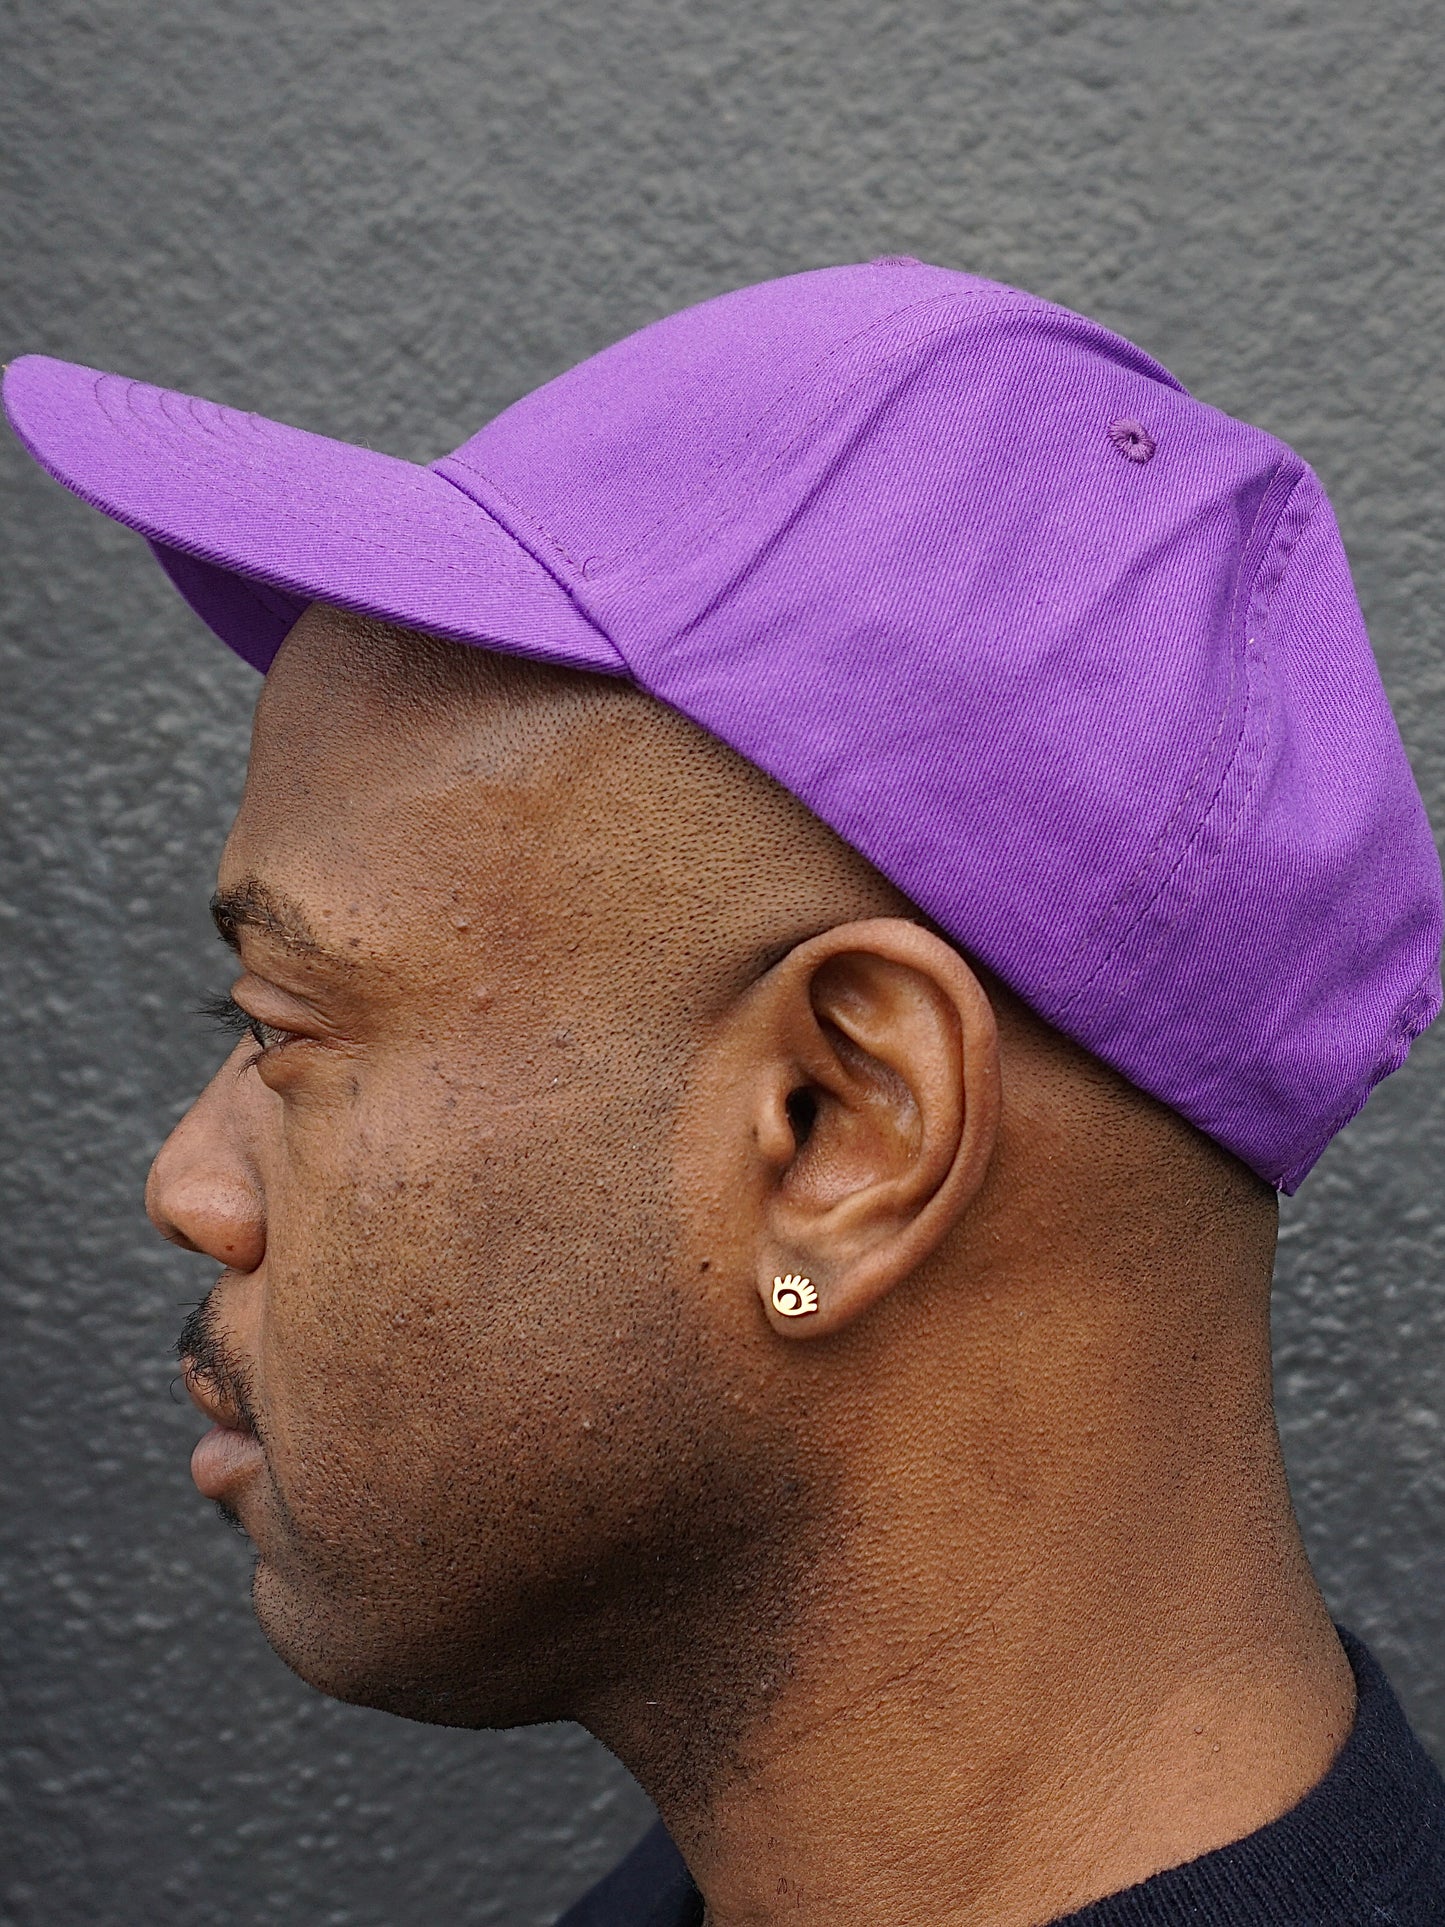 ROLO Structured 6-Panel Cap